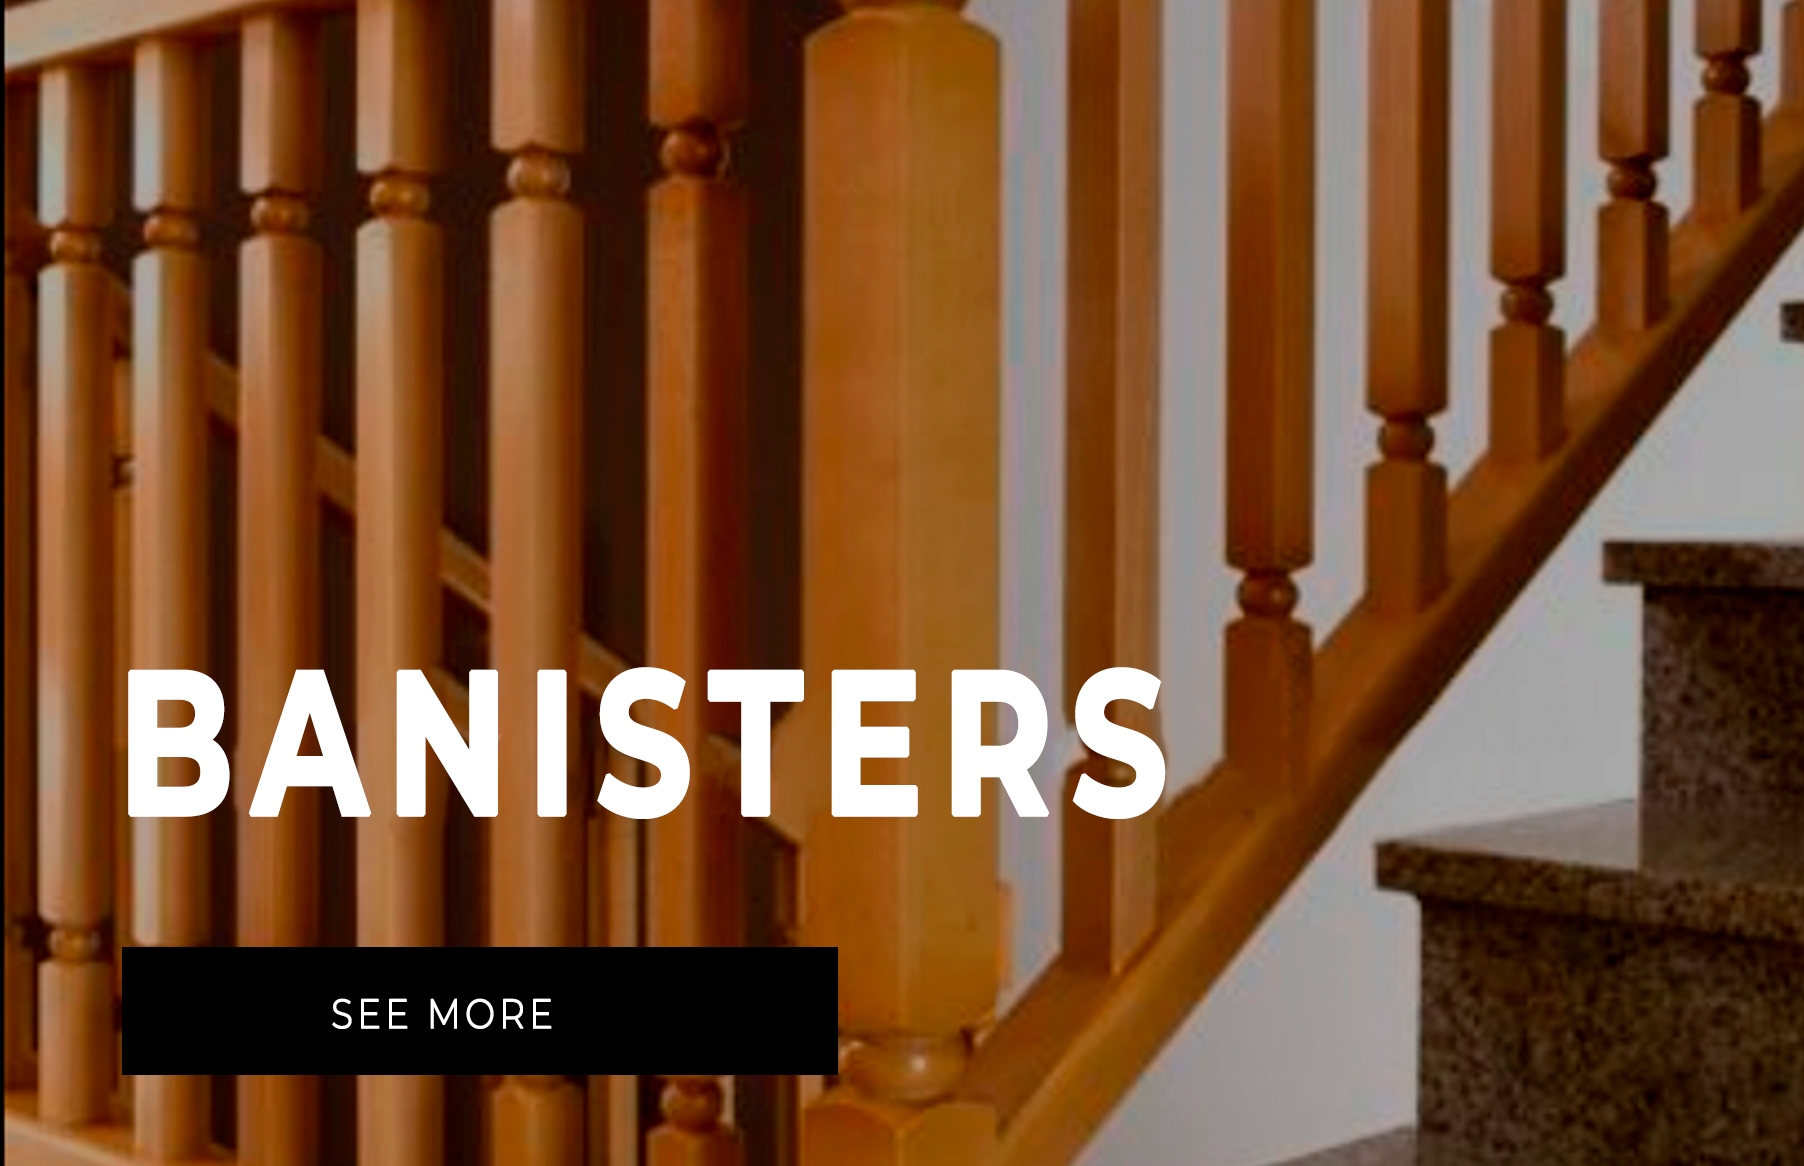 BANISTERs